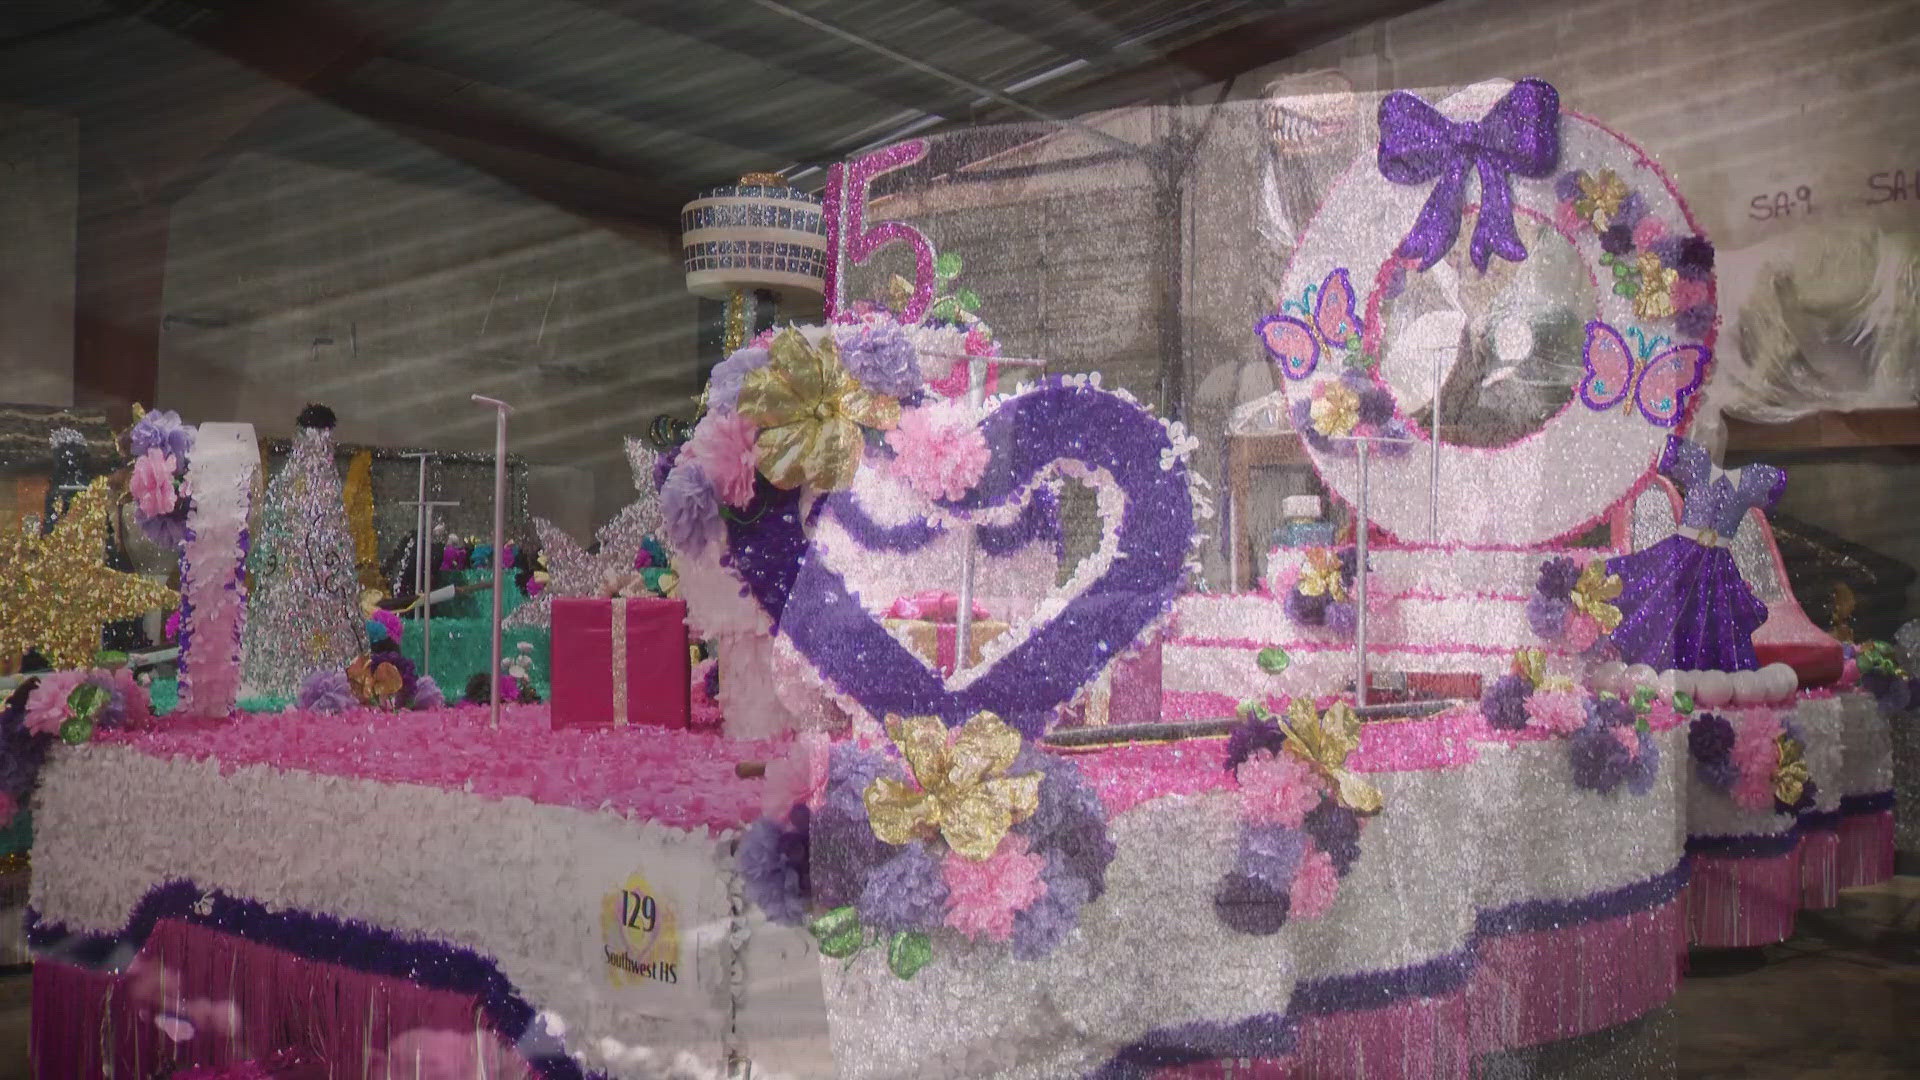 The Vice President of Fundraising for the Battle of Flowers Association took KENS 5 inside 'the den', which houses some of the festive floats.